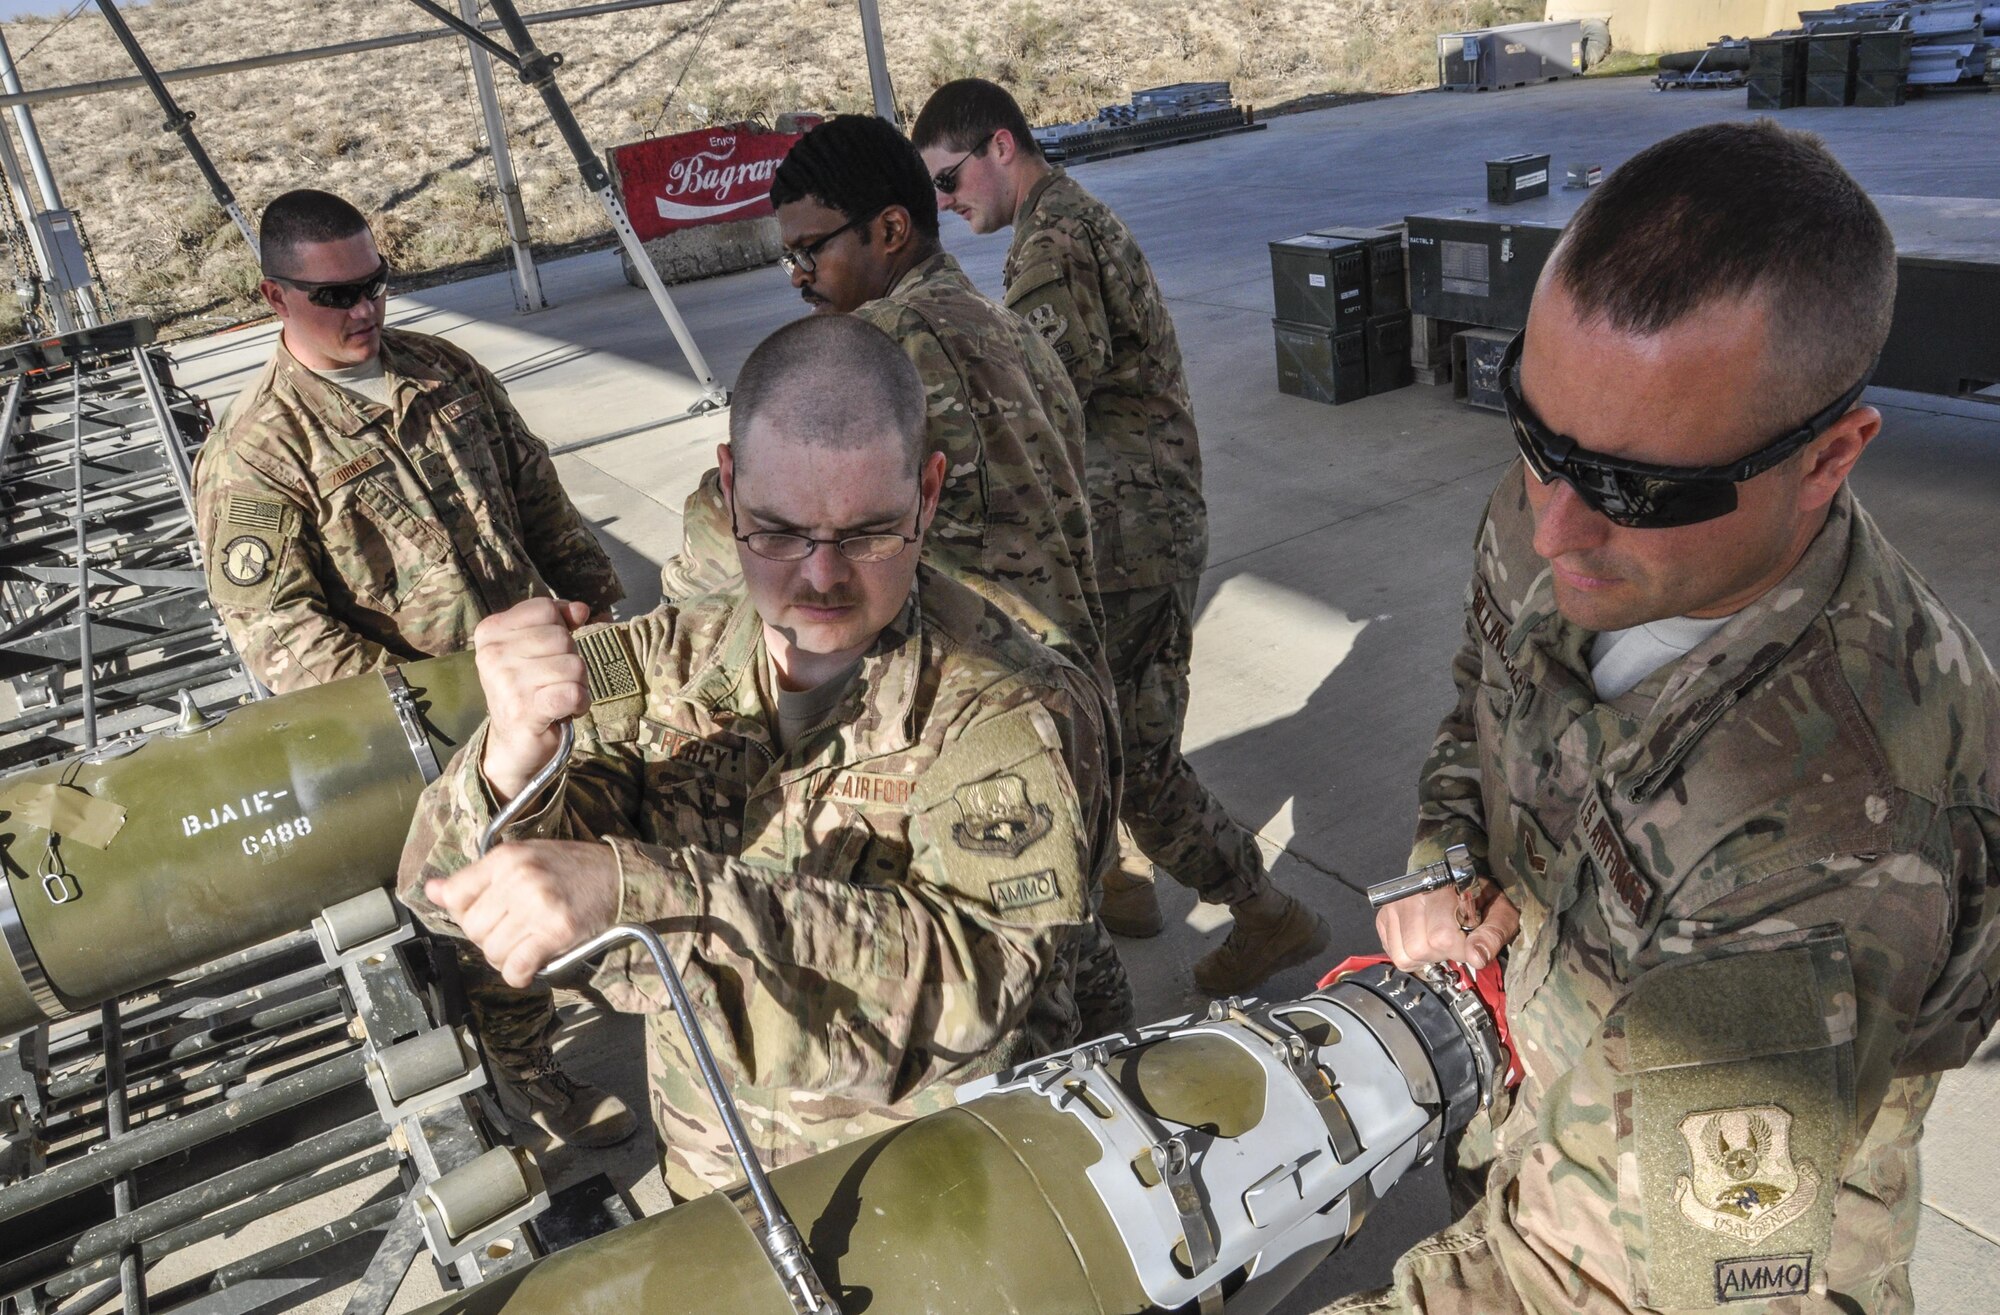 Staff Sgt. Samuel Percy, left, and Staff Sgt. Bryce Billingsly, both from the 455th Expeditionary Maintenance Squadron munitions flight and deployed from Hill Air Force Base, Utah, work on a GBU-54 500 pound bomb at Bagram Airfield, Afghanistan Nov. 17, 2015. The AMMO flight provides necessary weapons and countermeasures required to project combat airpower. (U.S. Air Force photo by Tech. Sgt. Nicholas Rau/Released) 